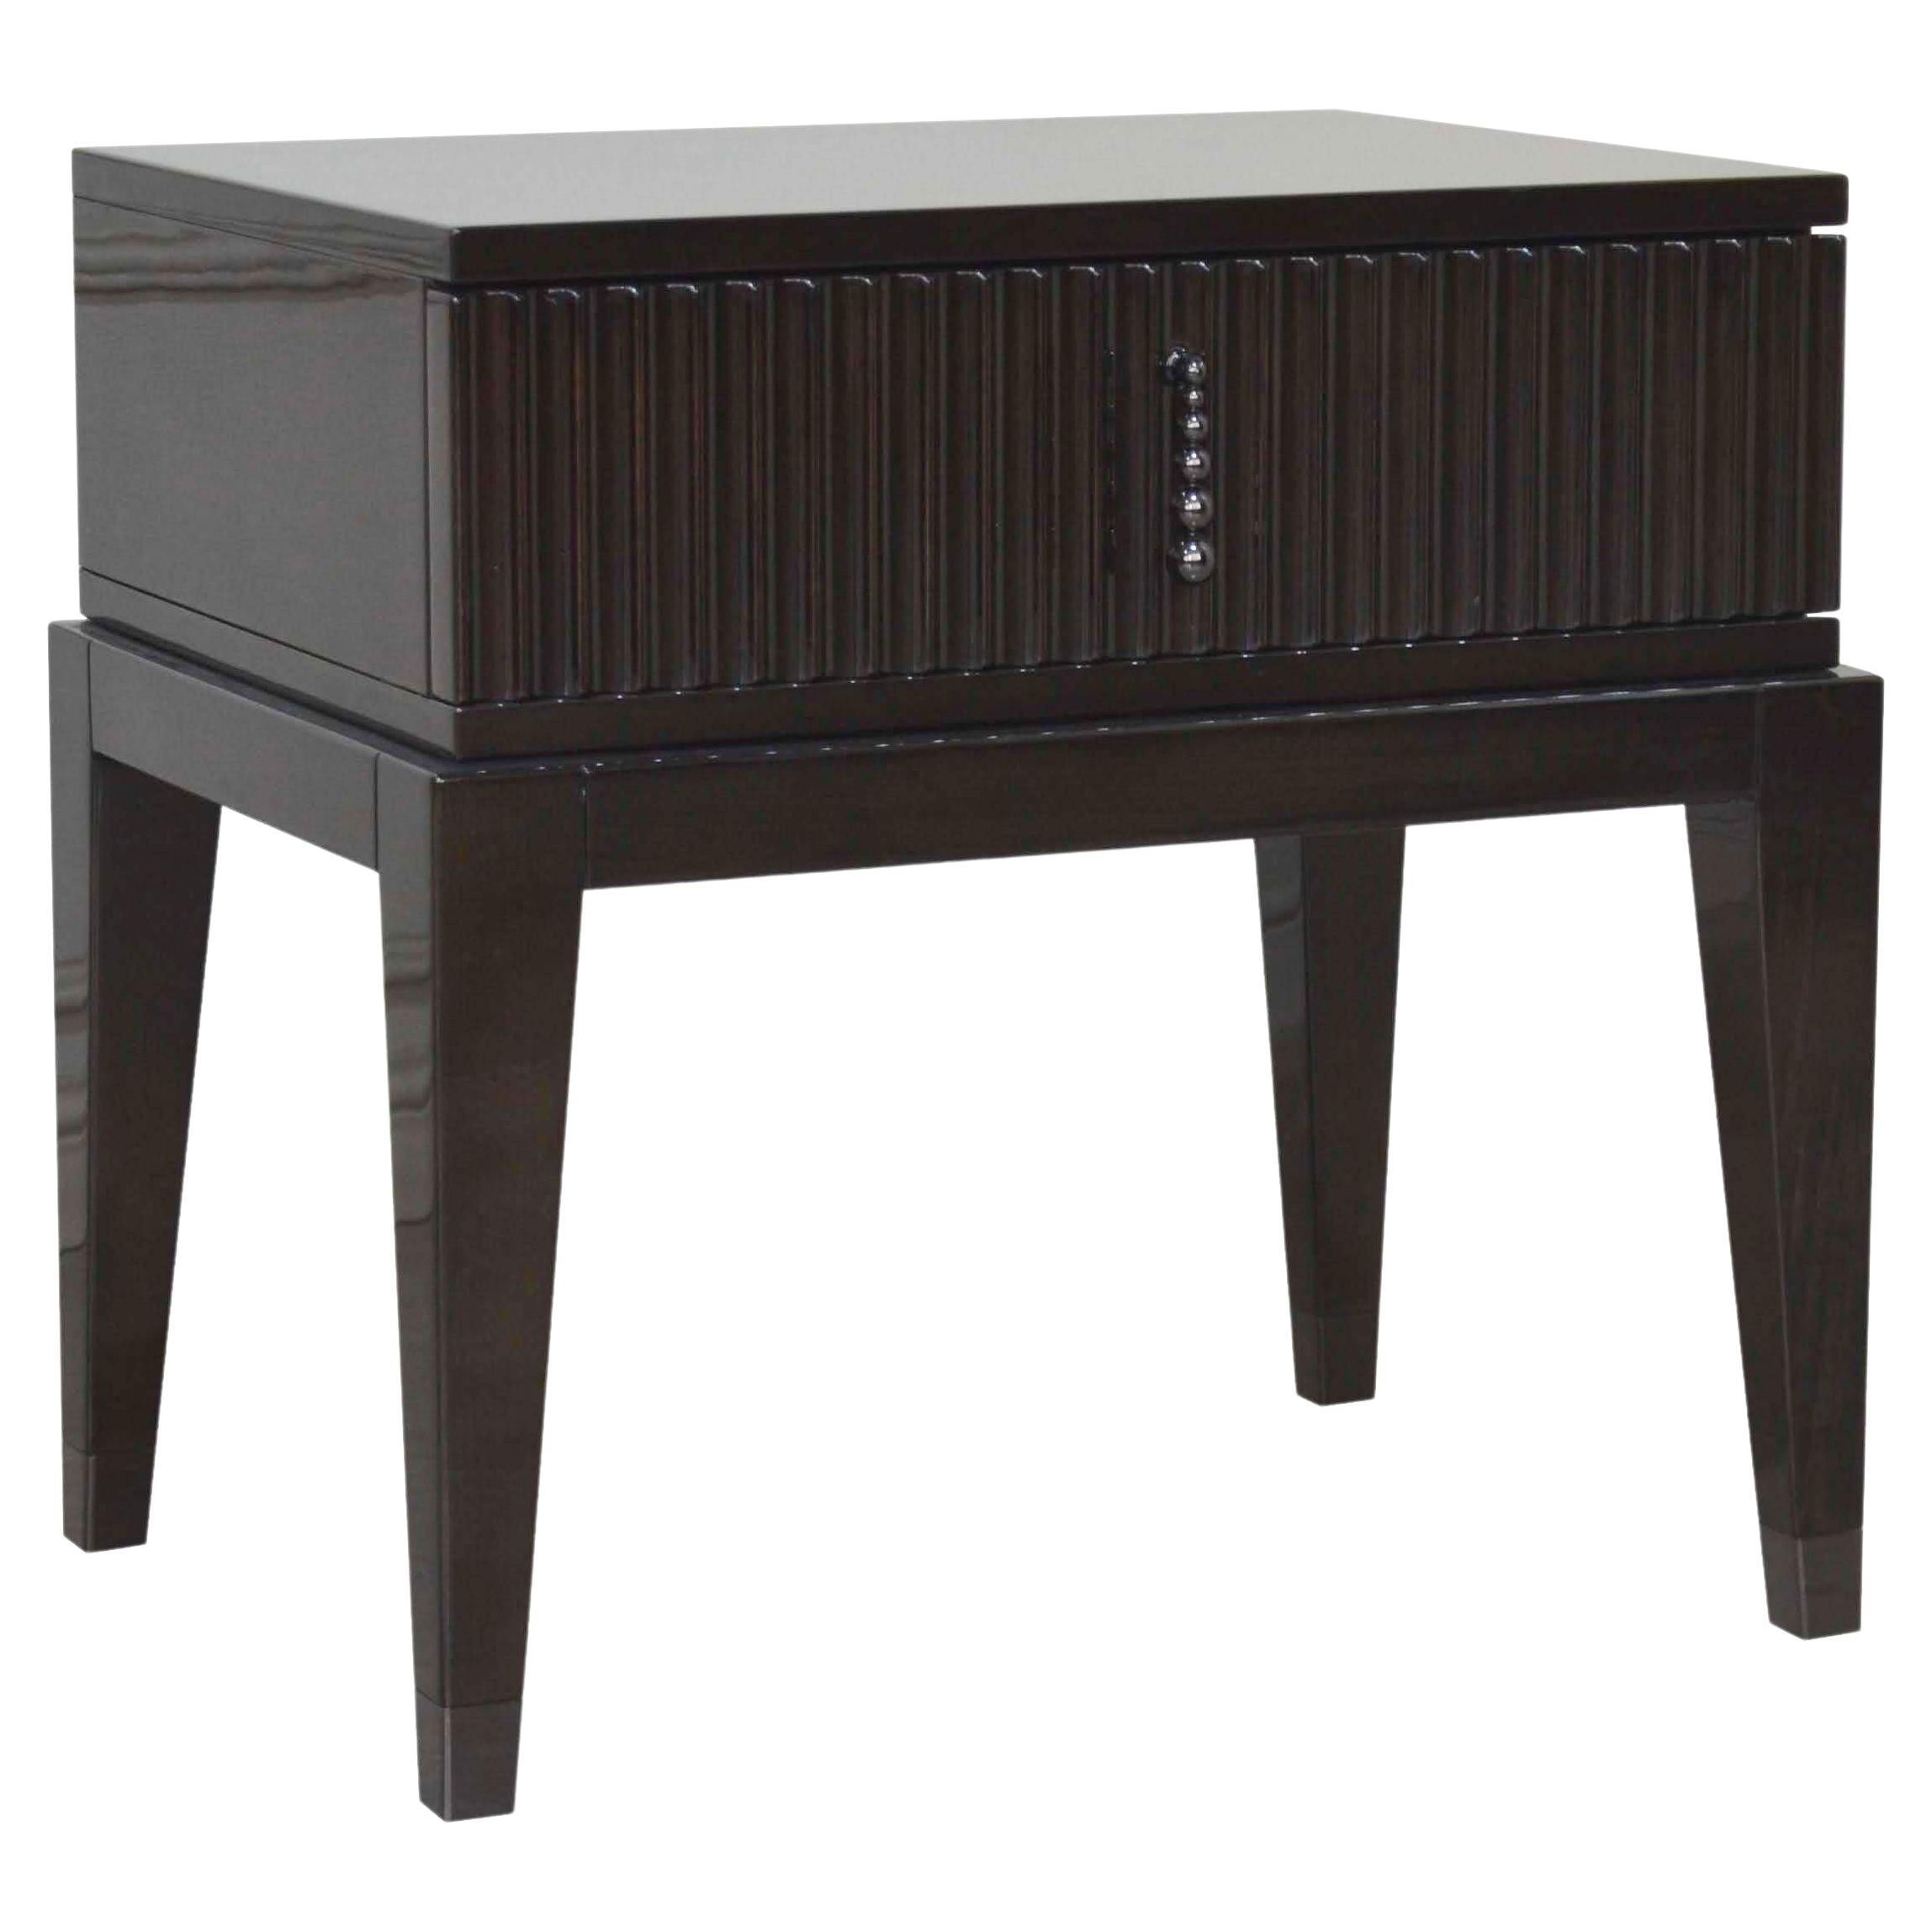 Italian Night Table in High Gloss Ebony Veneer with One Upholstered Drawer